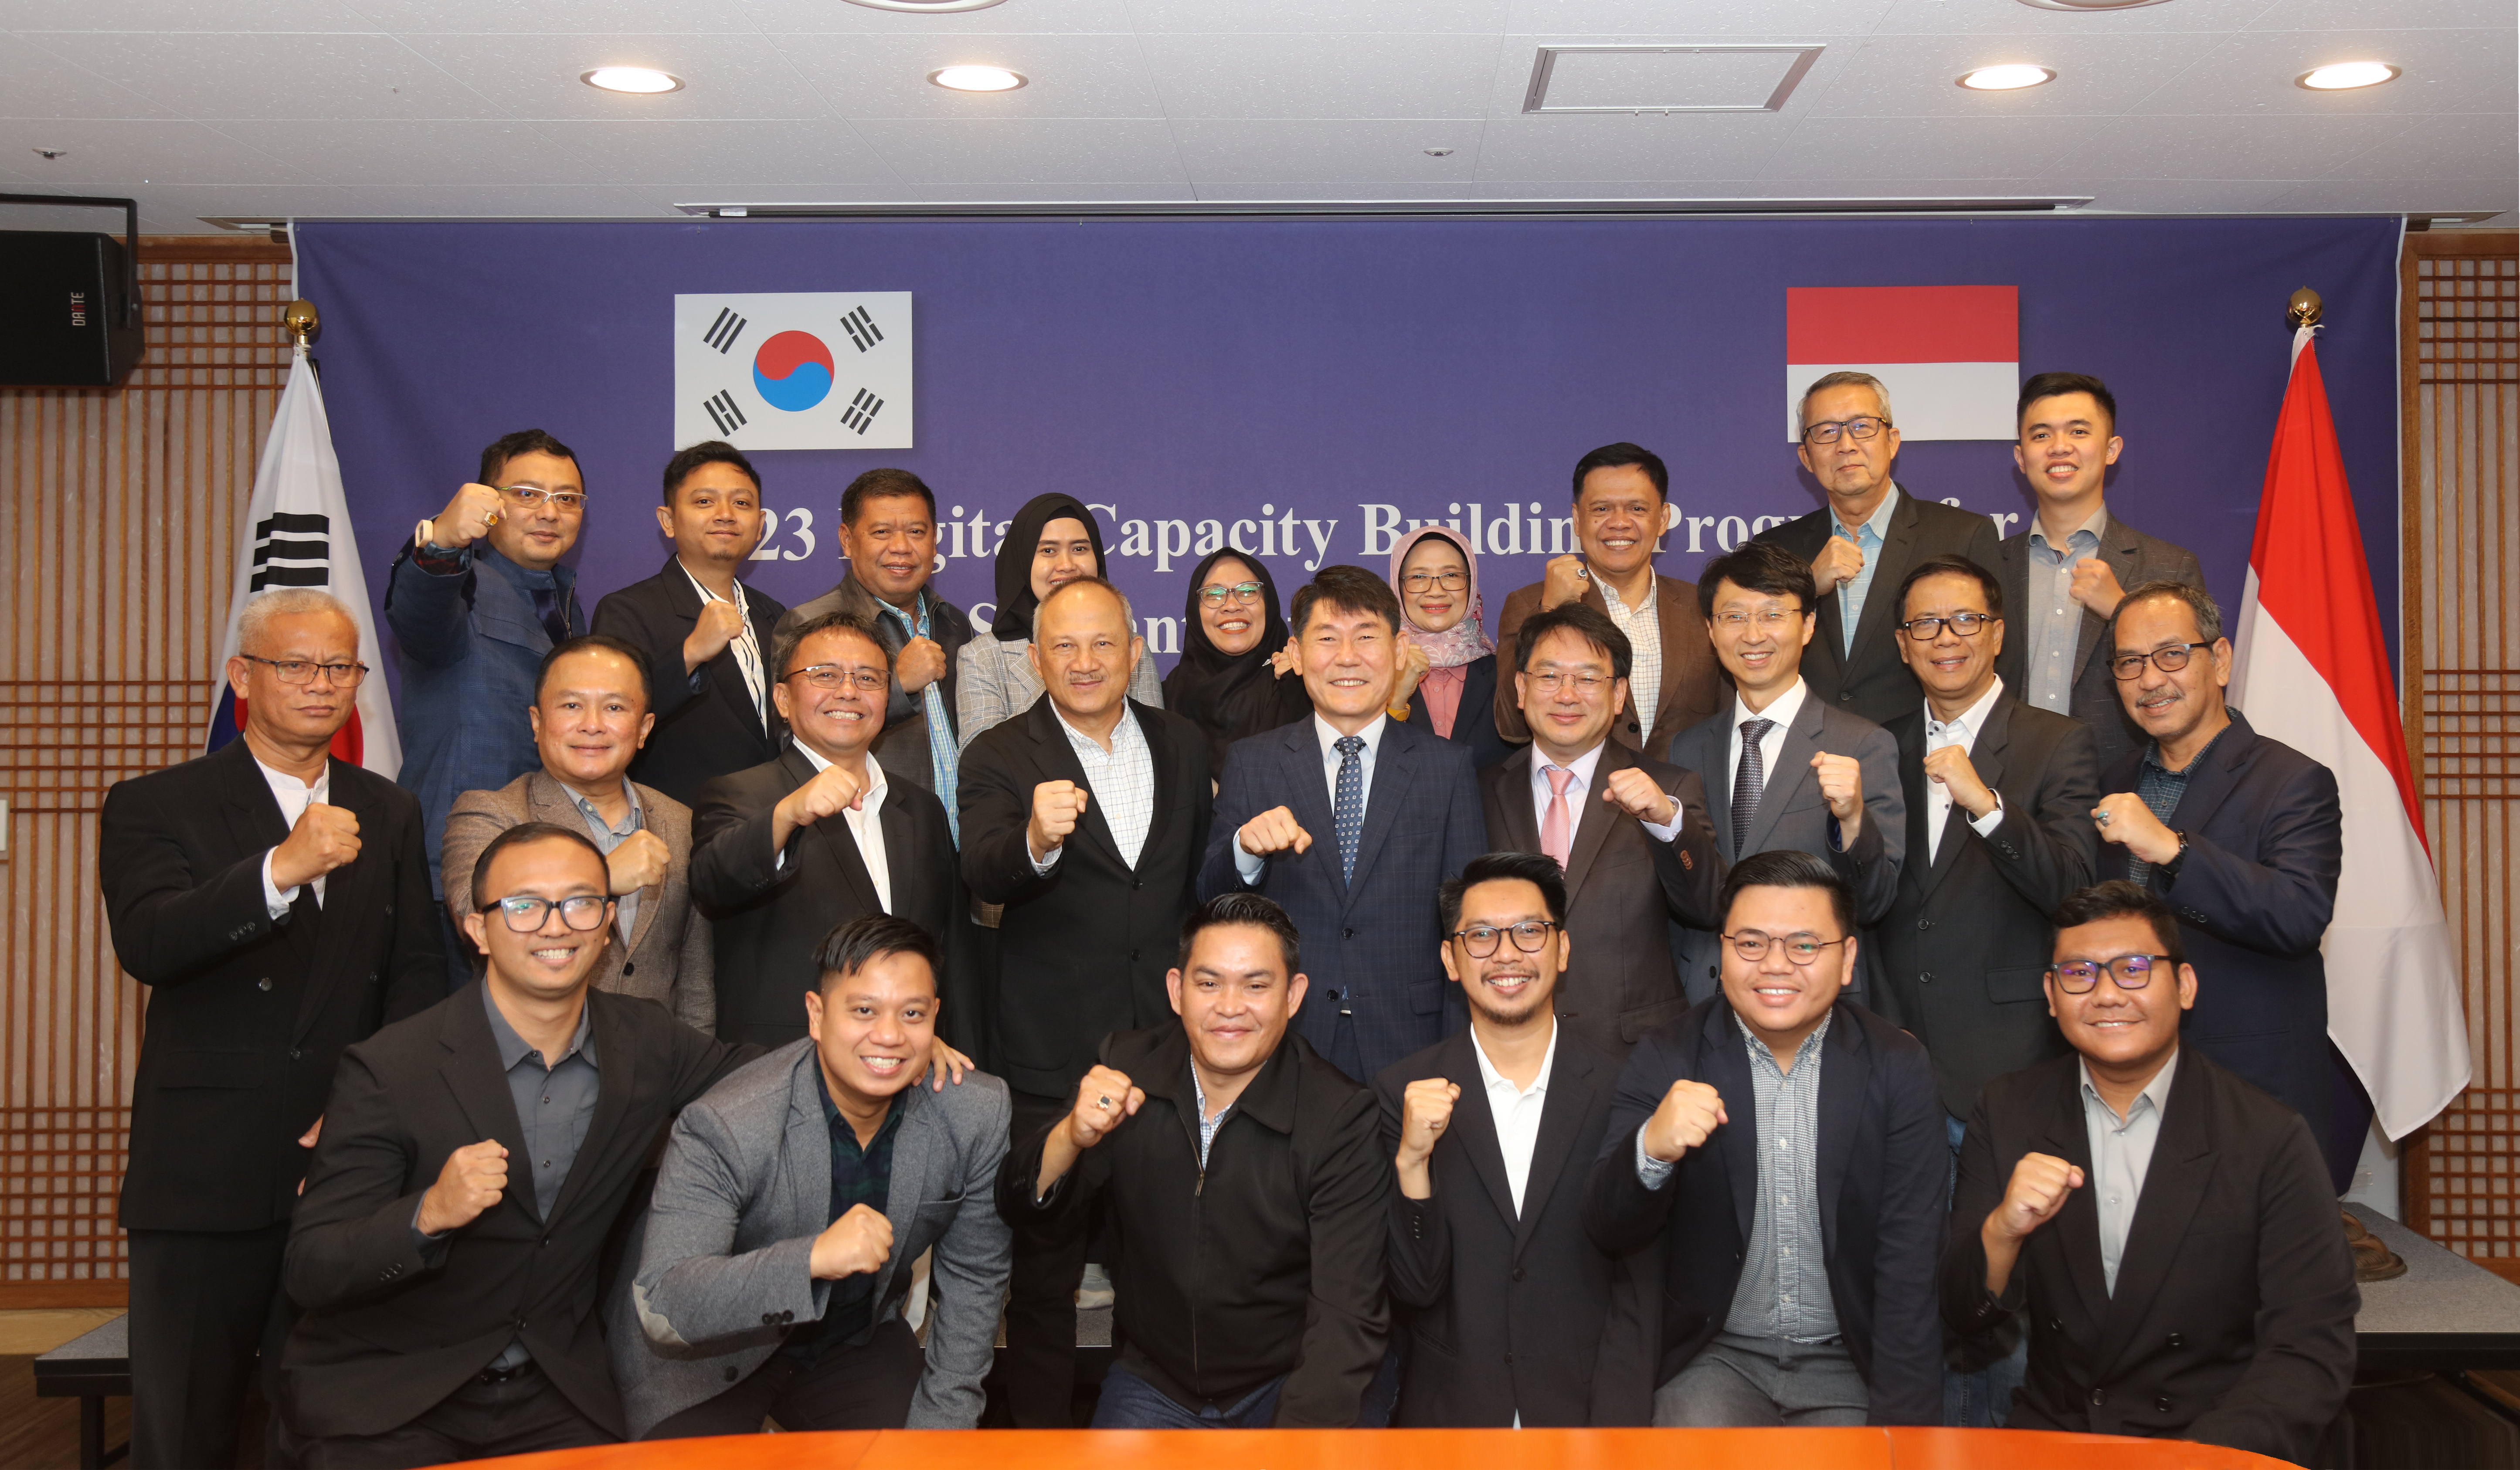 Indonesian Officials from West Java Province Shared Korea%26%2339%3Bs Digital Transformation and Administrative Innovation 큰 이미지[마우스 클릭 시 창닫기]